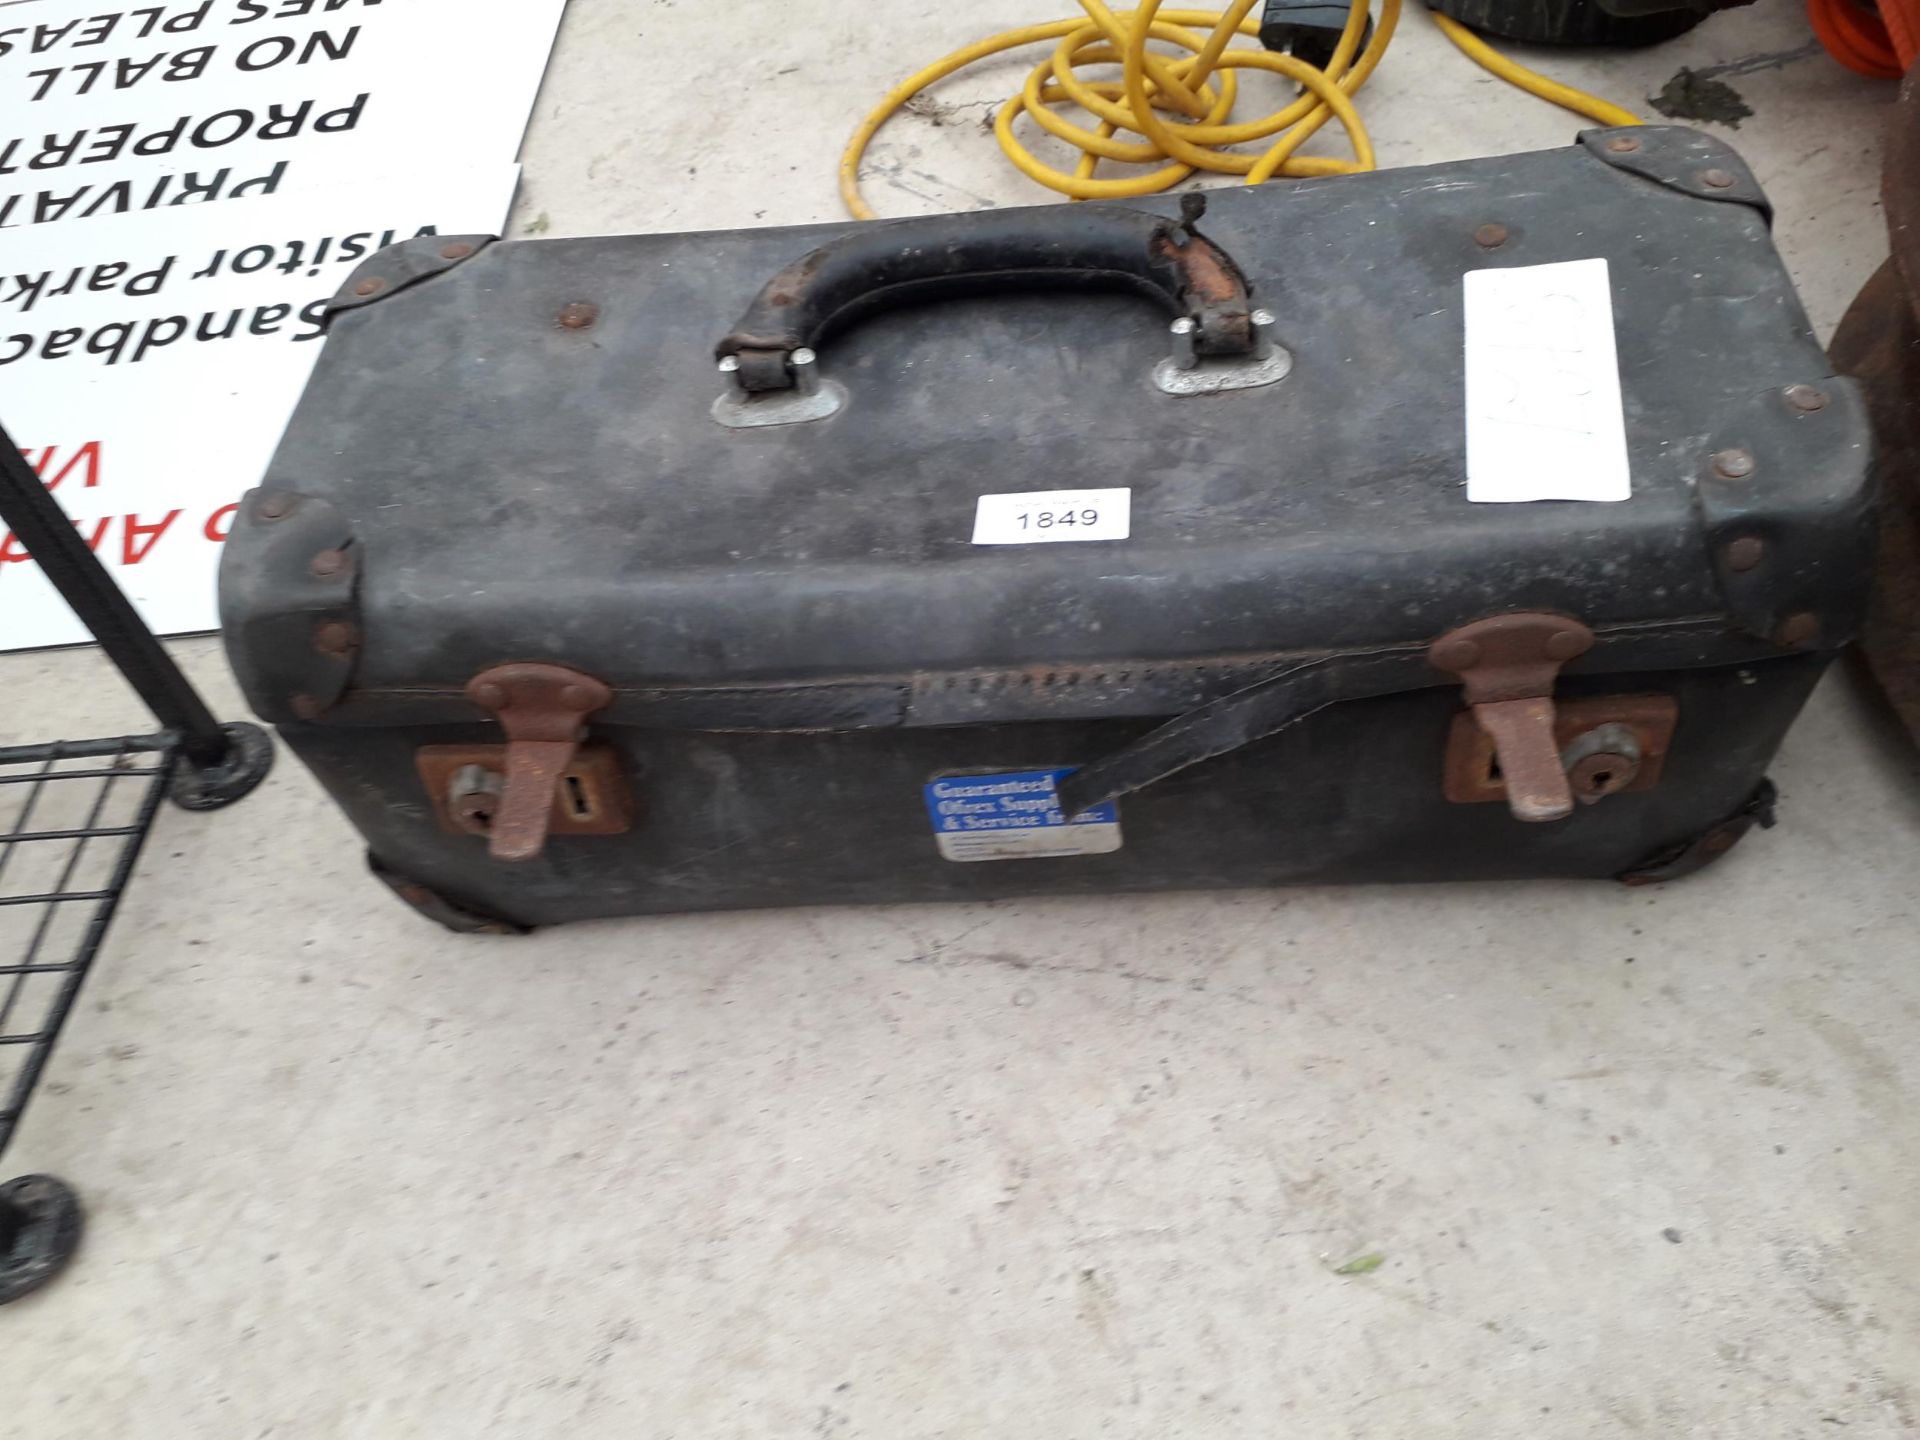 A TOOL BAG CONTAINING VARIOUS HAMMERS, SPANNERS, ETC - Image 3 of 3